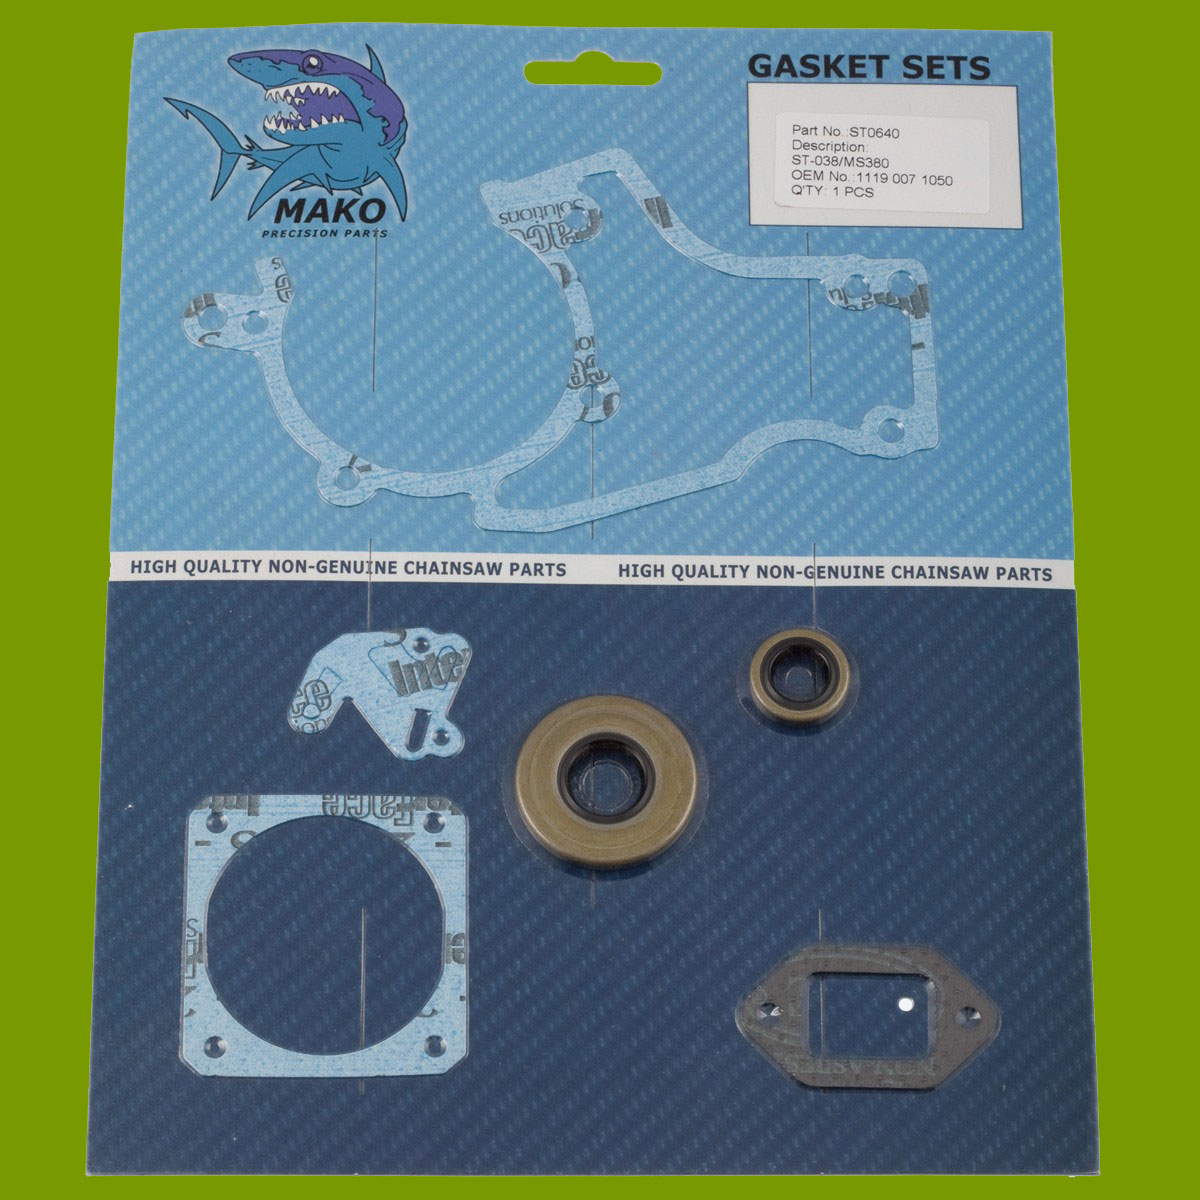 (image for) Stihl Gasket Set for 038 and MS380 1119 007 1050, ST0640